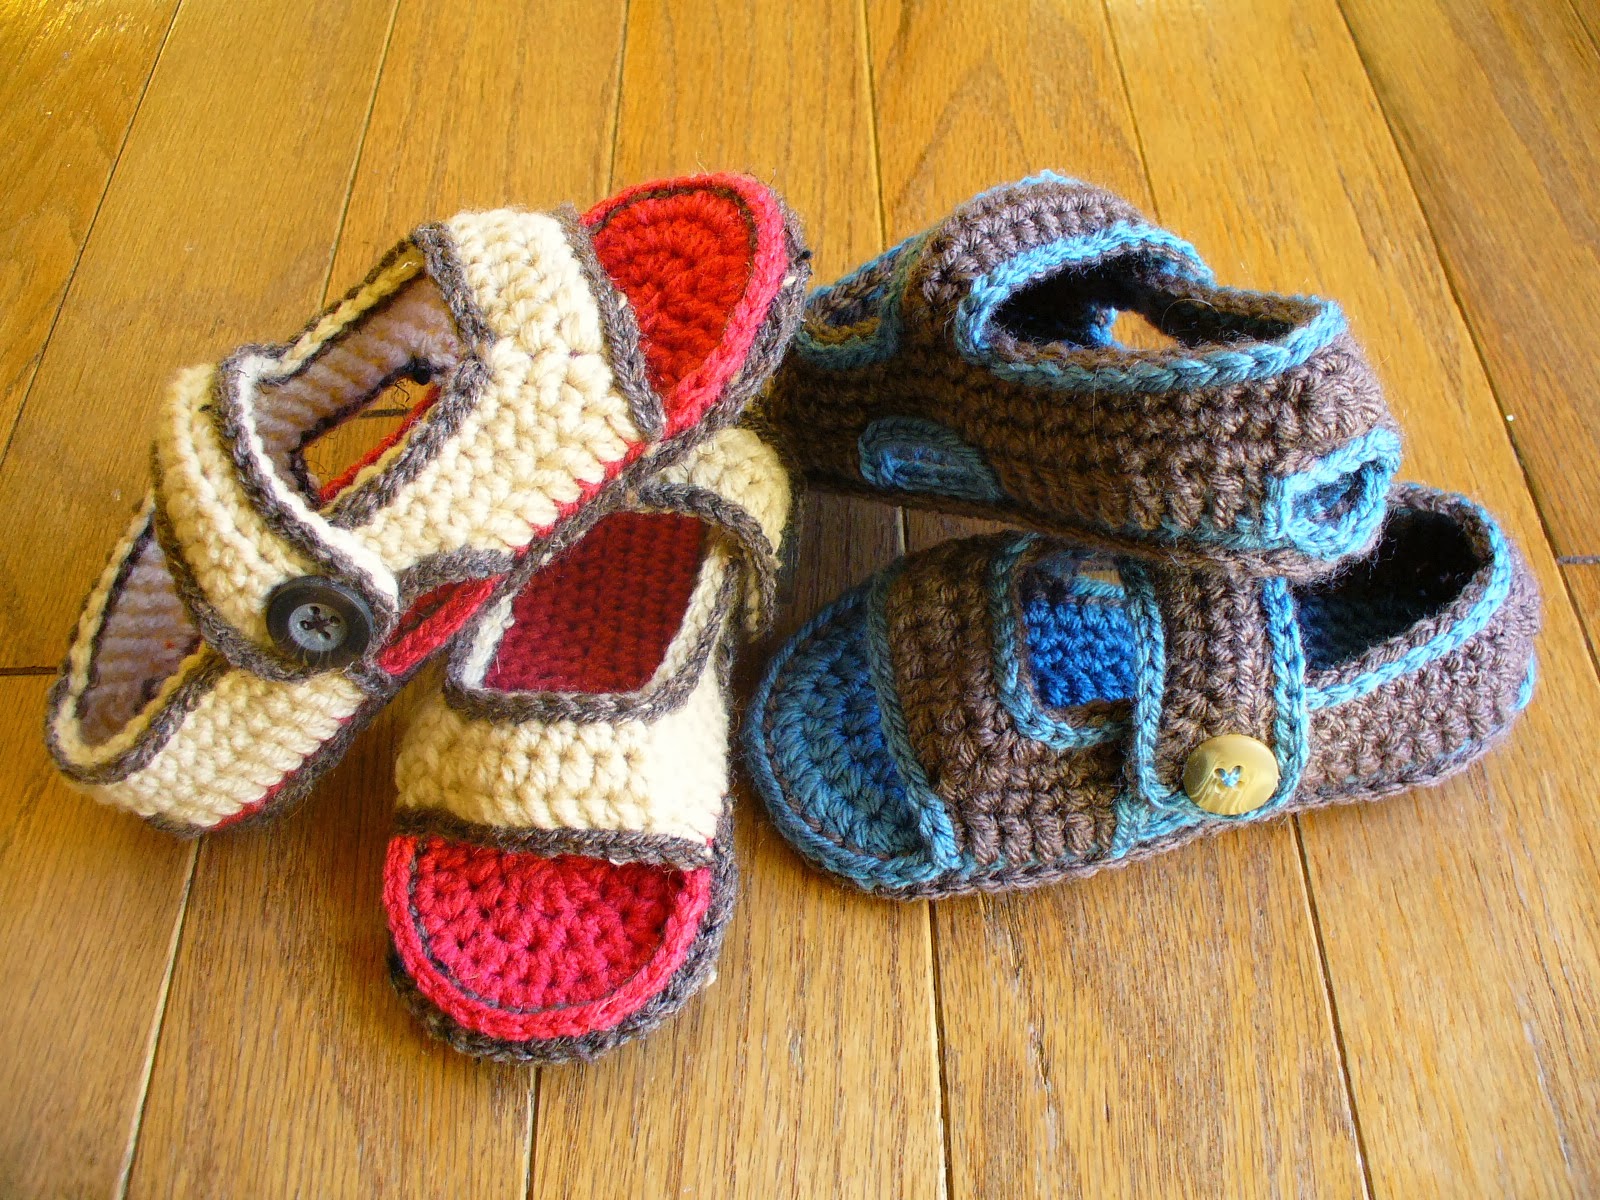 60+ Adorable and FREE Crochet Baby Sandals Patterns --> Toddler Two Strap Sandals